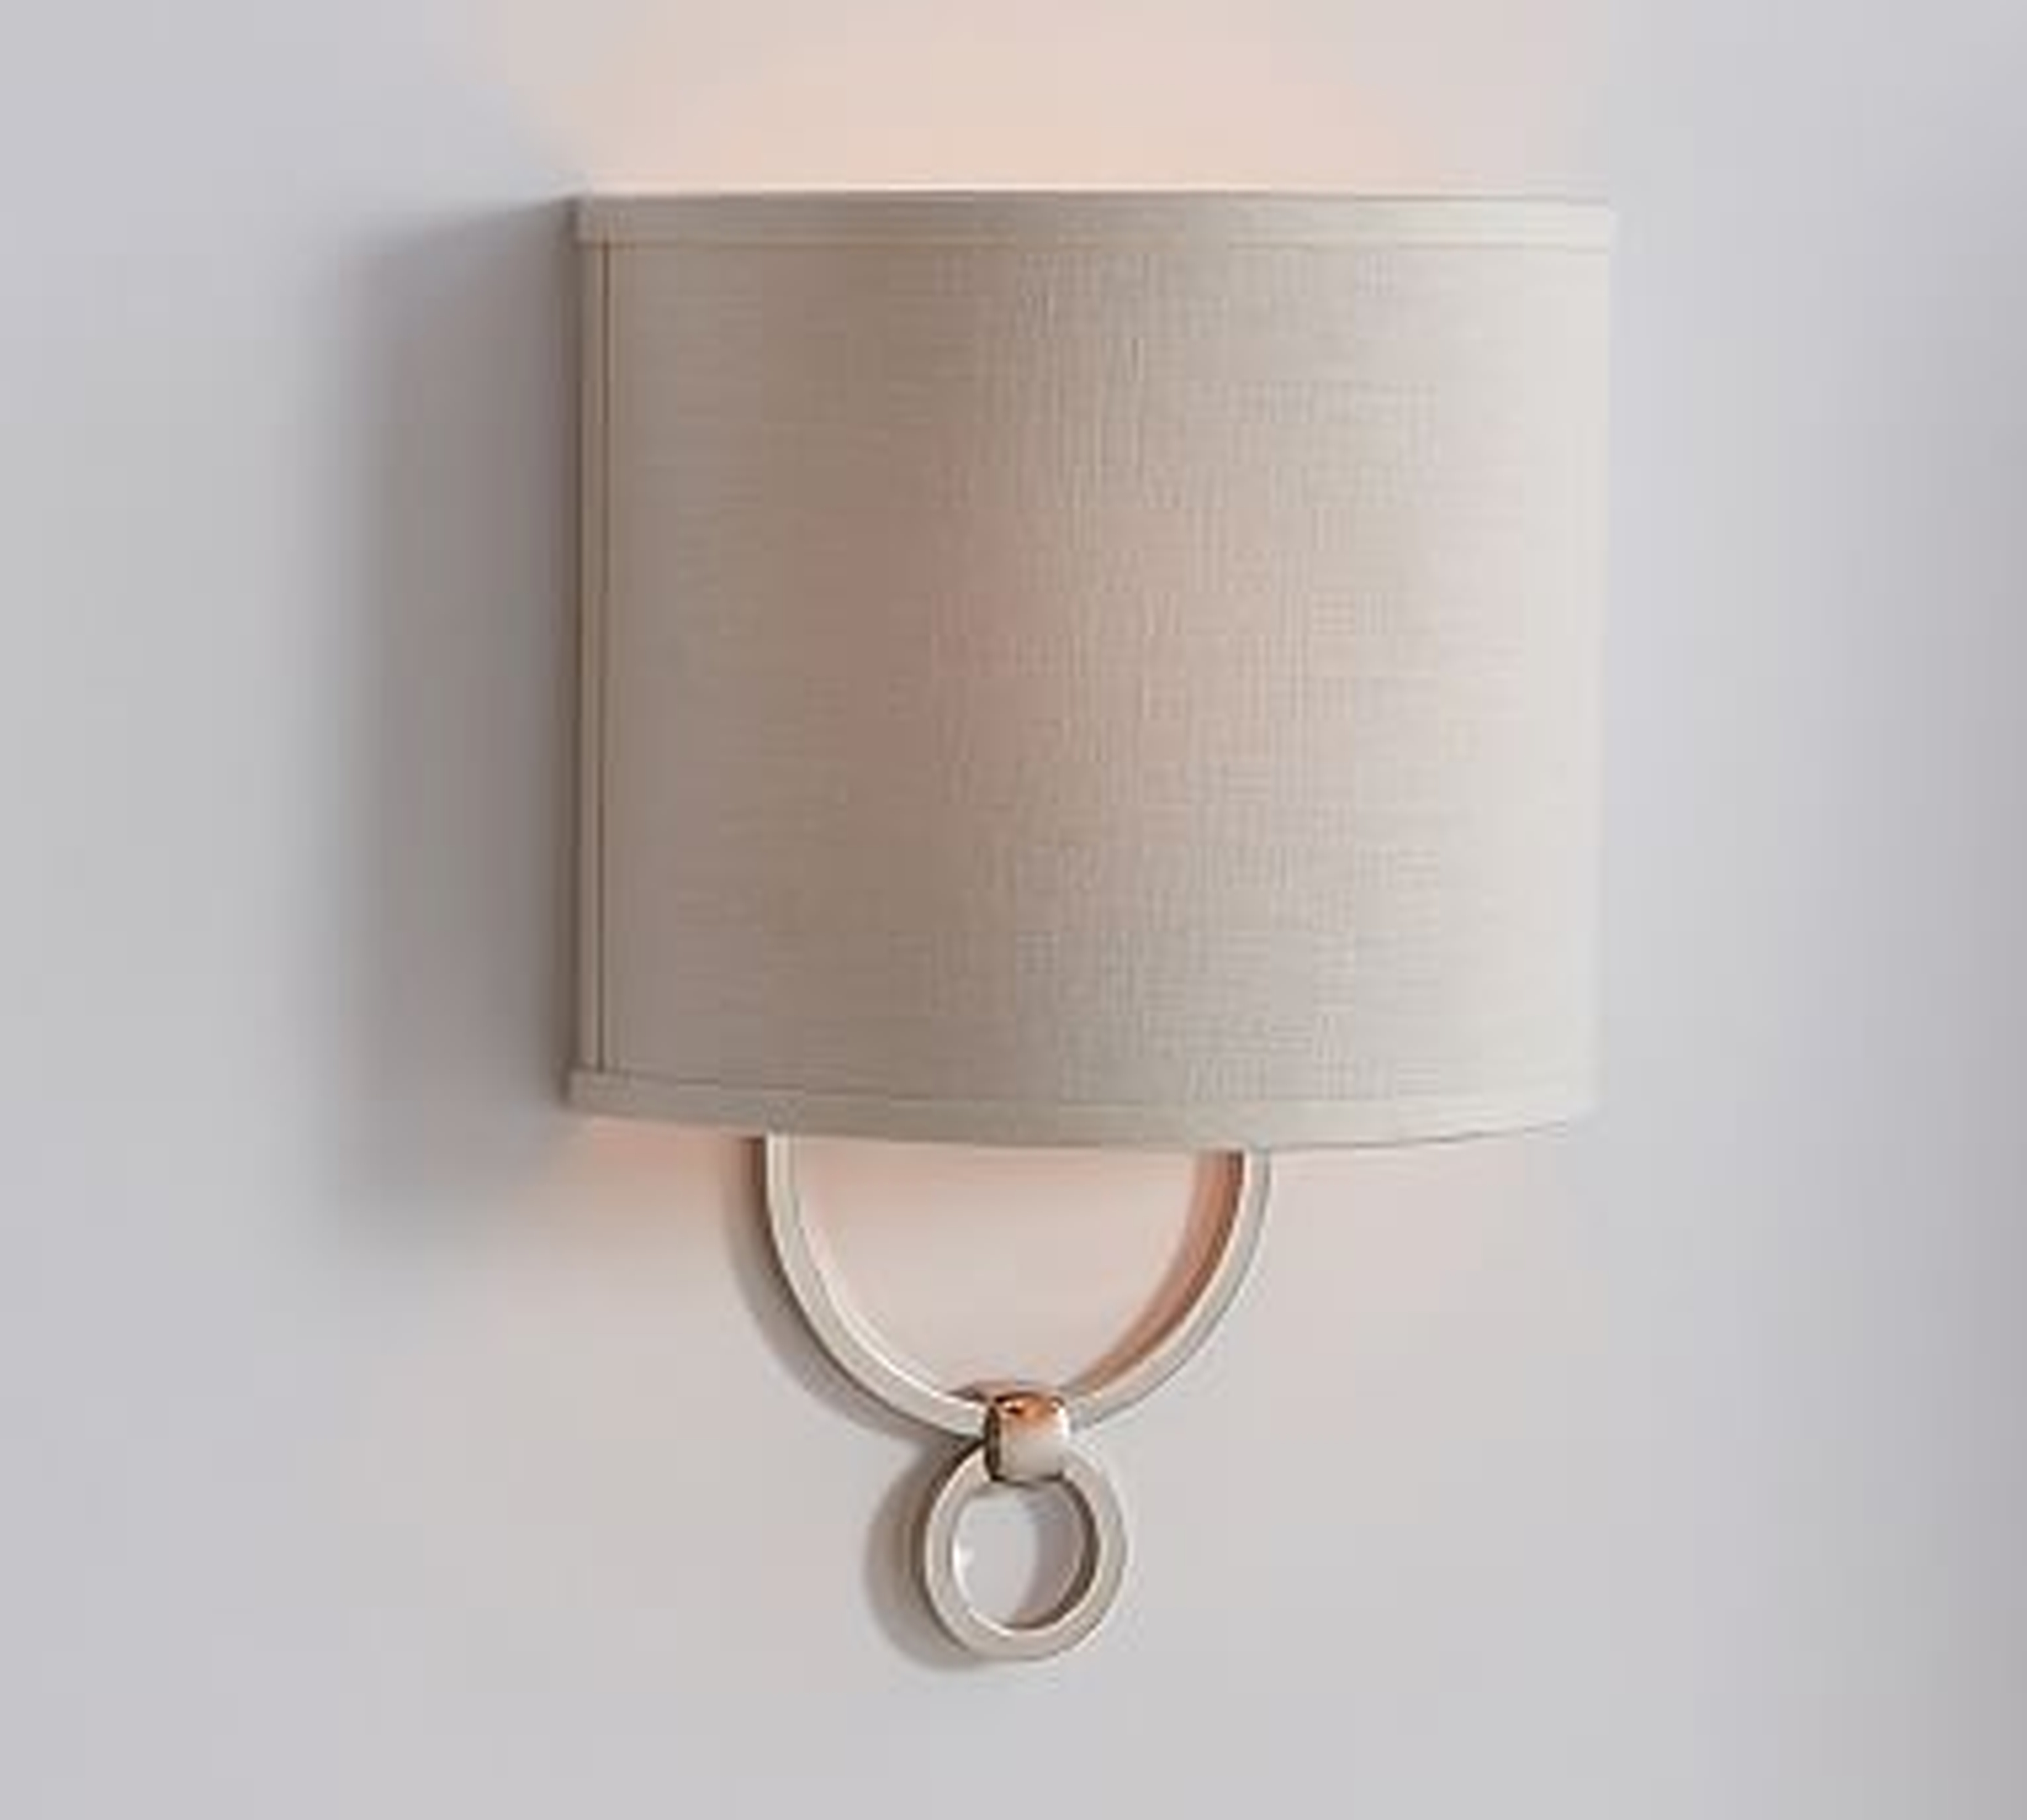 Francis Metal Shaded Sconce, Polished Nickel - Pottery Barn